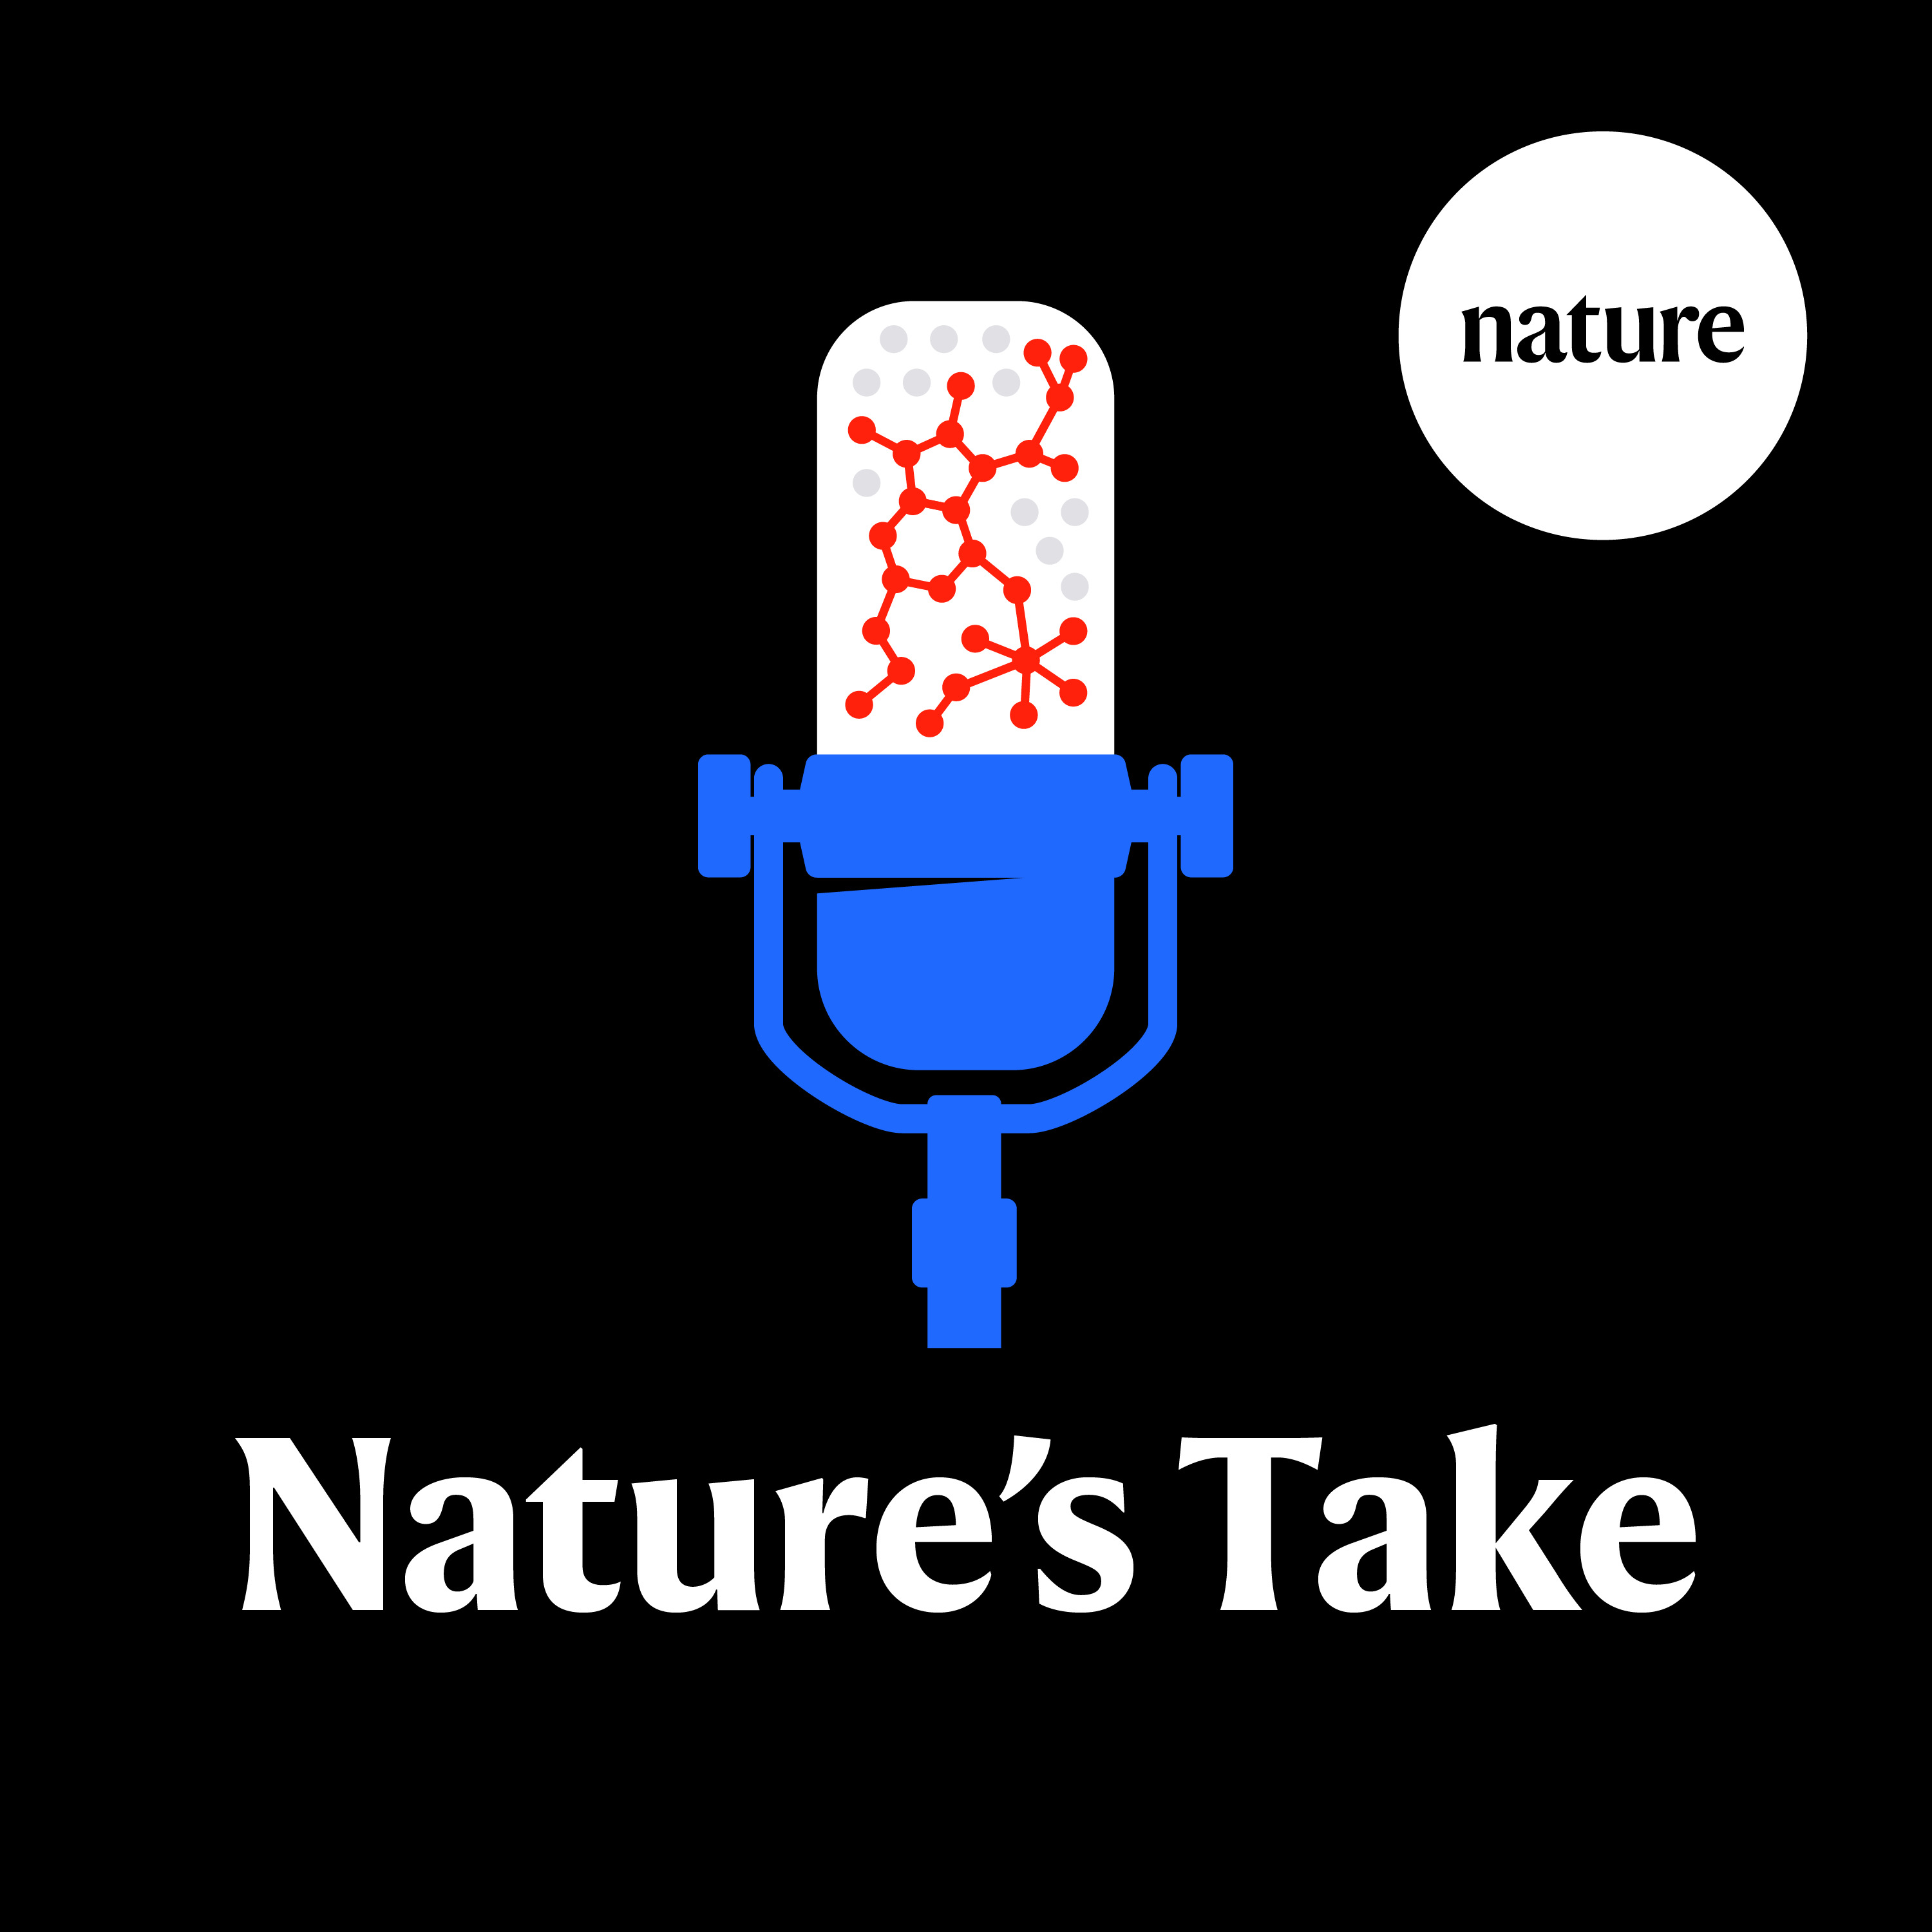 Nature’s Take: How Twitter’s changes could affect science